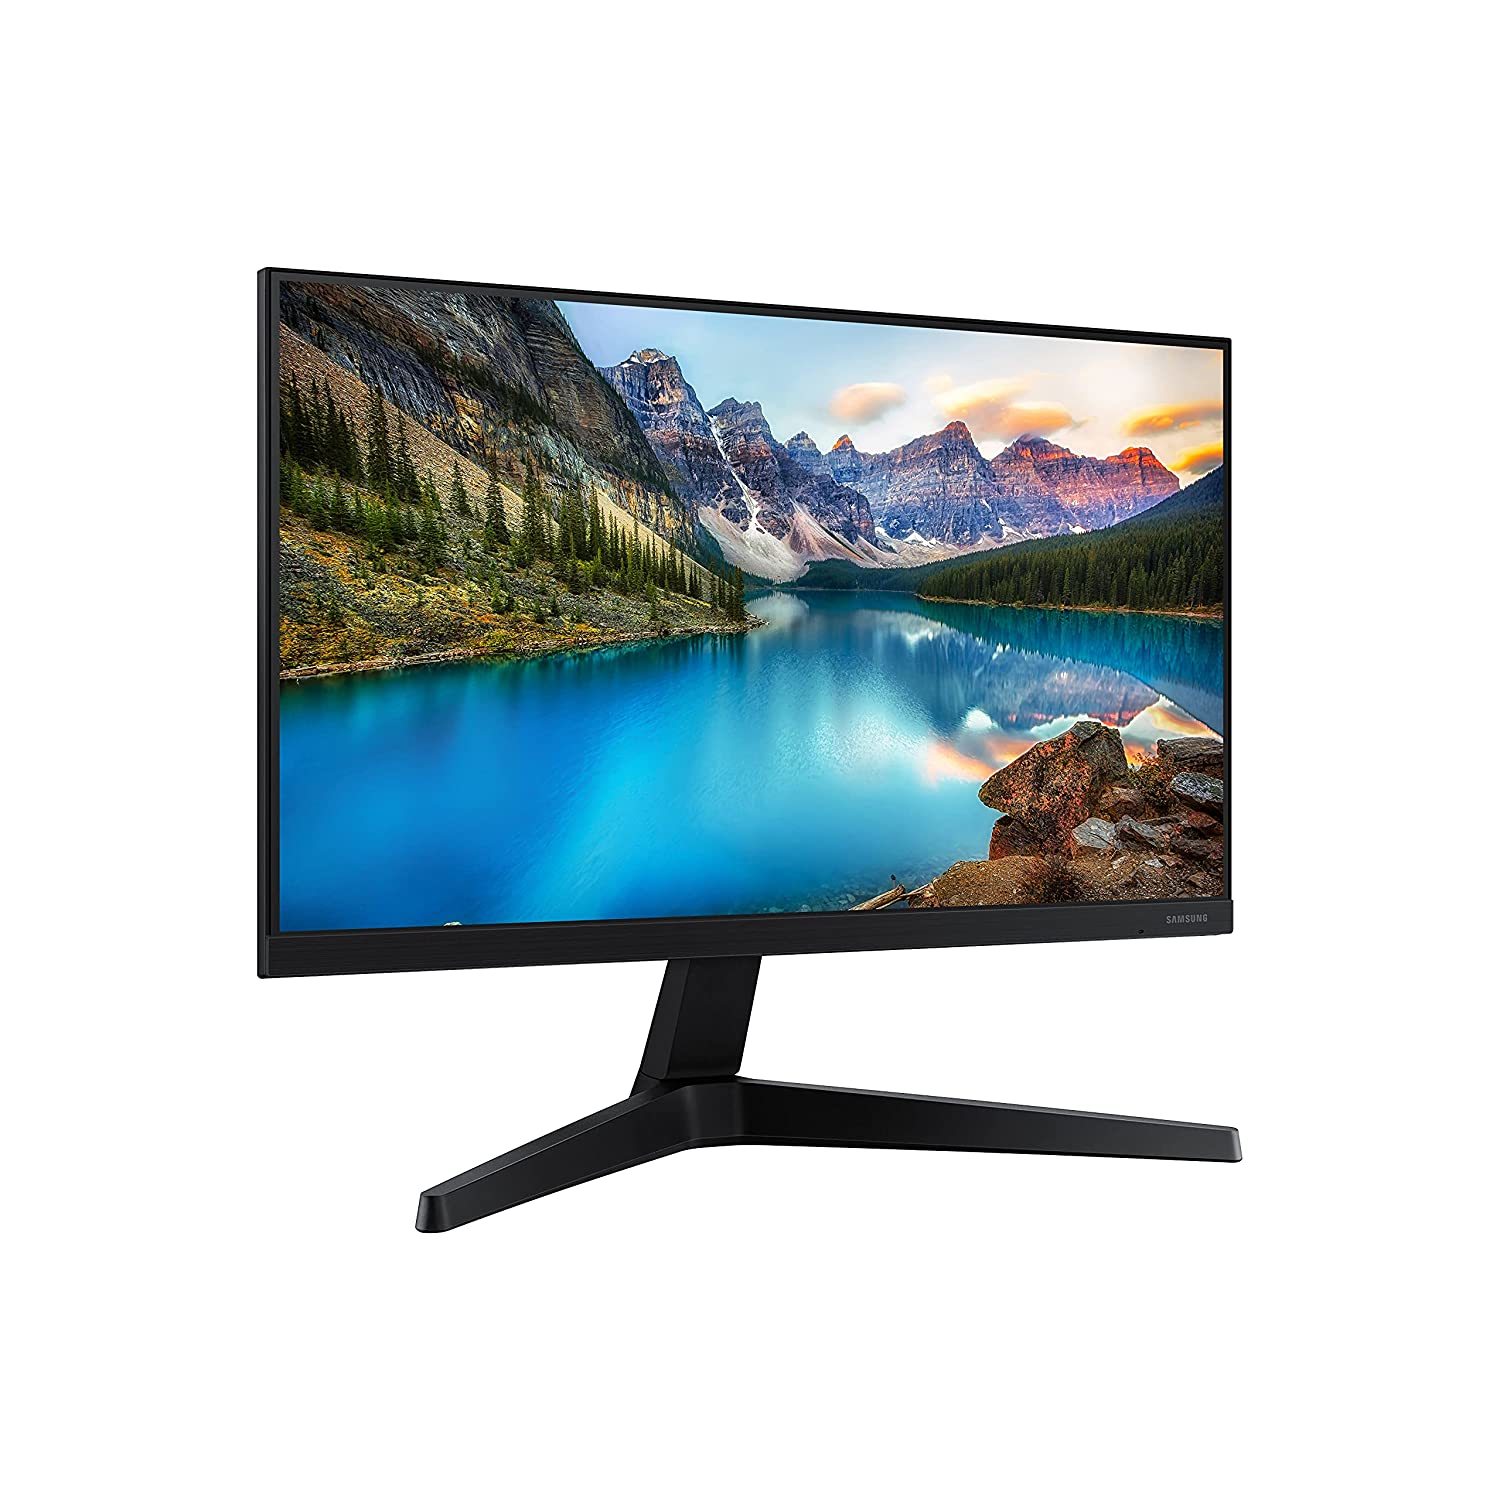 Samsung T37F Series 24-Inch Fhd 1080p and 50 similar items